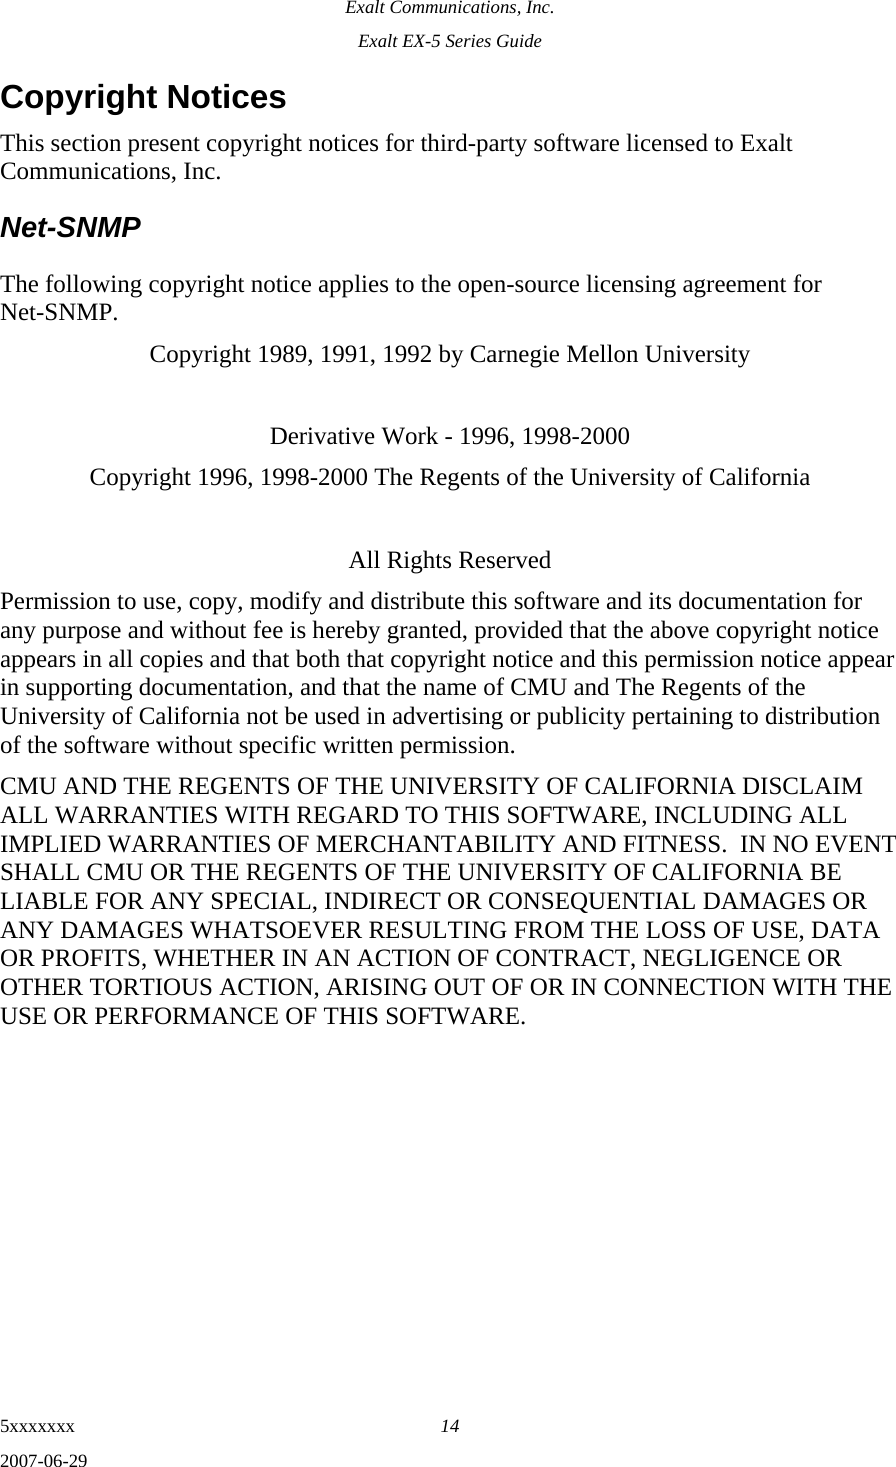 Exalt Communications, Inc. Exalt EX-5 Series Guide 5xxxxxxx  14 2007-06-29 Copyright Notices This section present copyright notices for third-party software licensed to Exalt Communications, Inc. Net-SNMP The following copyright notice applies to the open-source licensing agreement for Net-SNMP. Copyright 1989, 1991, 1992 by Carnegie Mellon University  Derivative Work - 1996, 1998-2000 Copyright 1996, 1998-2000 The Regents of the University of California  All Rights Reserved Permission to use, copy, modify and distribute this software and its documentation for any purpose and without fee is hereby granted, provided that the above copyright notice appears in all copies and that both that copyright notice and this permission notice appear in supporting documentation, and that the name of CMU and The Regents of the University of California not be used in advertising or publicity pertaining to distribution of the software without specific written permission. CMU AND THE REGENTS OF THE UNIVERSITY OF CALIFORNIA DISCLAIM ALL WARRANTIES WITH REGARD TO THIS SOFTWARE, INCLUDING ALL IMPLIED WARRANTIES OF MERCHANTABILITY AND FITNESS.  IN NO EVENT SHALL CMU OR THE REGENTS OF THE UNIVERSITY OF CALIFORNIA BE LIABLE FOR ANY SPECIAL, INDIRECT OR CONSEQUENTIAL DAMAGES OR ANY DAMAGES WHATSOEVER RESULTING FROM THE LOSS OF USE, DATA OR PROFITS, WHETHER IN AN ACTION OF CONTRACT, NEGLIGENCE OR OTHER TORTIOUS ACTION, ARISING OUT OF OR IN CONNECTION WITH THE USE OR PERFORMANCE OF THIS SOFTWARE. 